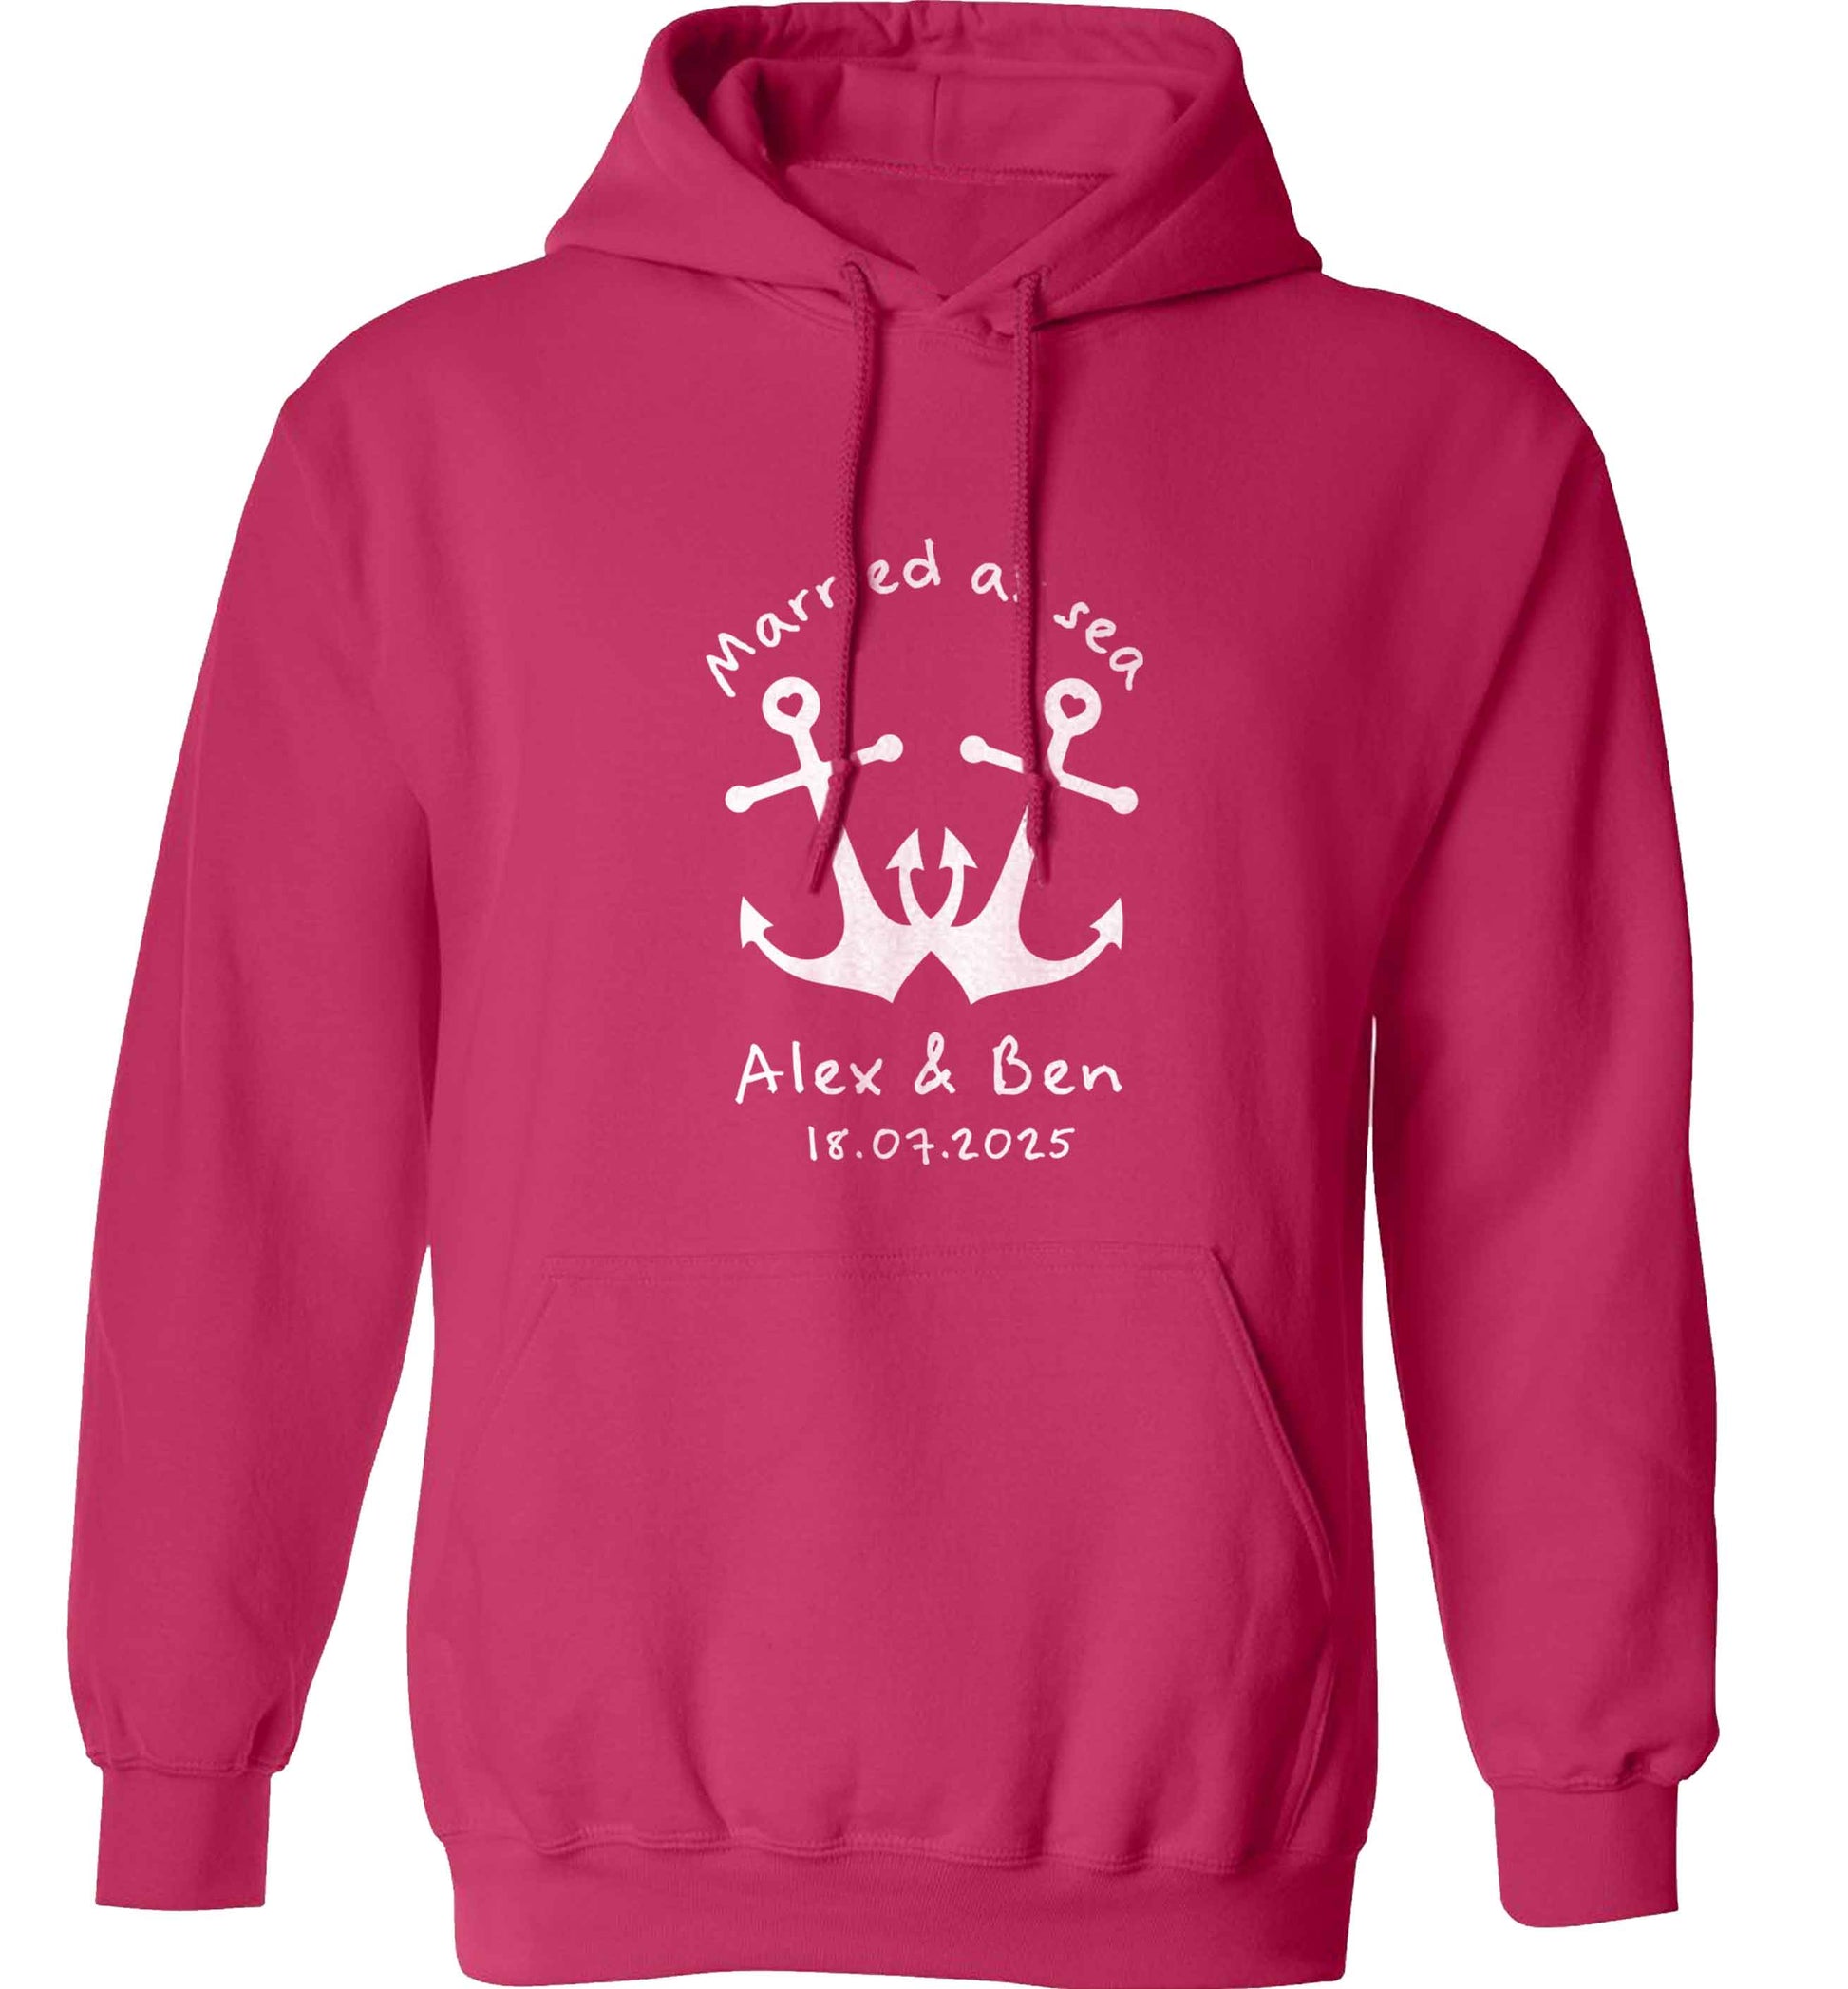 Married at sea blue anchors adults unisex pink hoodie 2XL